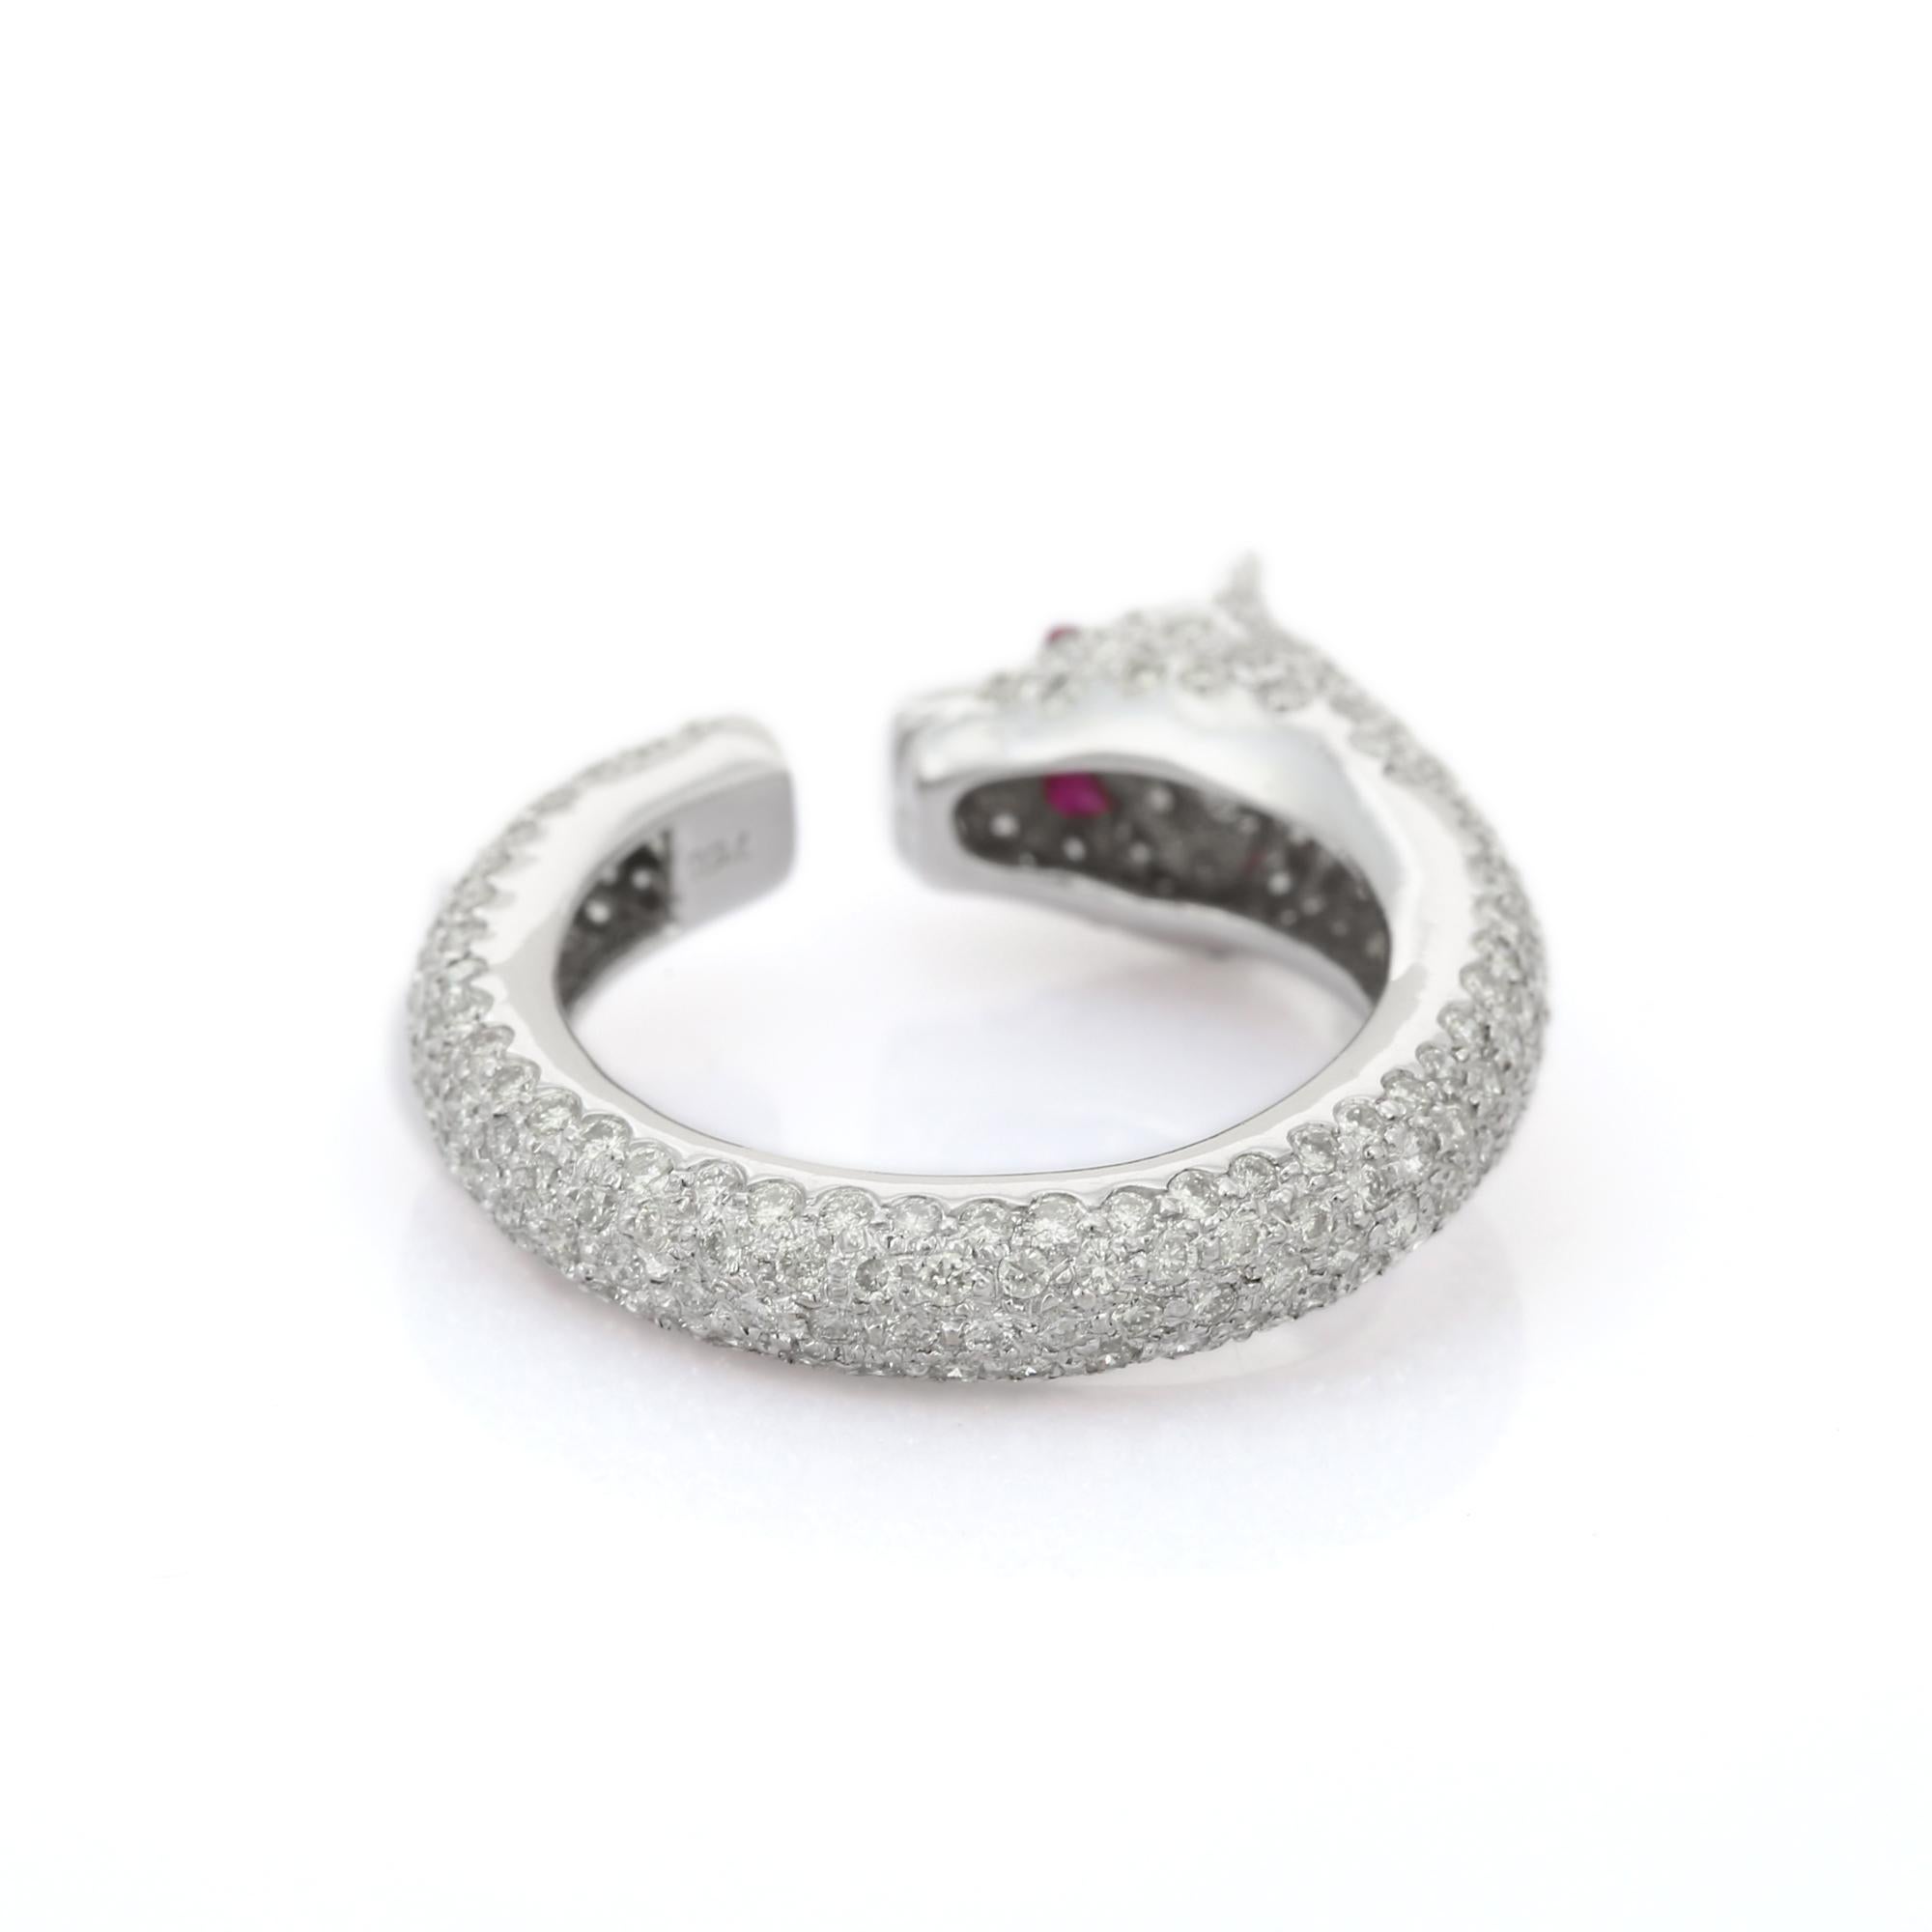 For Sale:  Cluster Diamond Panther Ring with Ruby Gemstone Eyes in 18K Solid White Gold 3